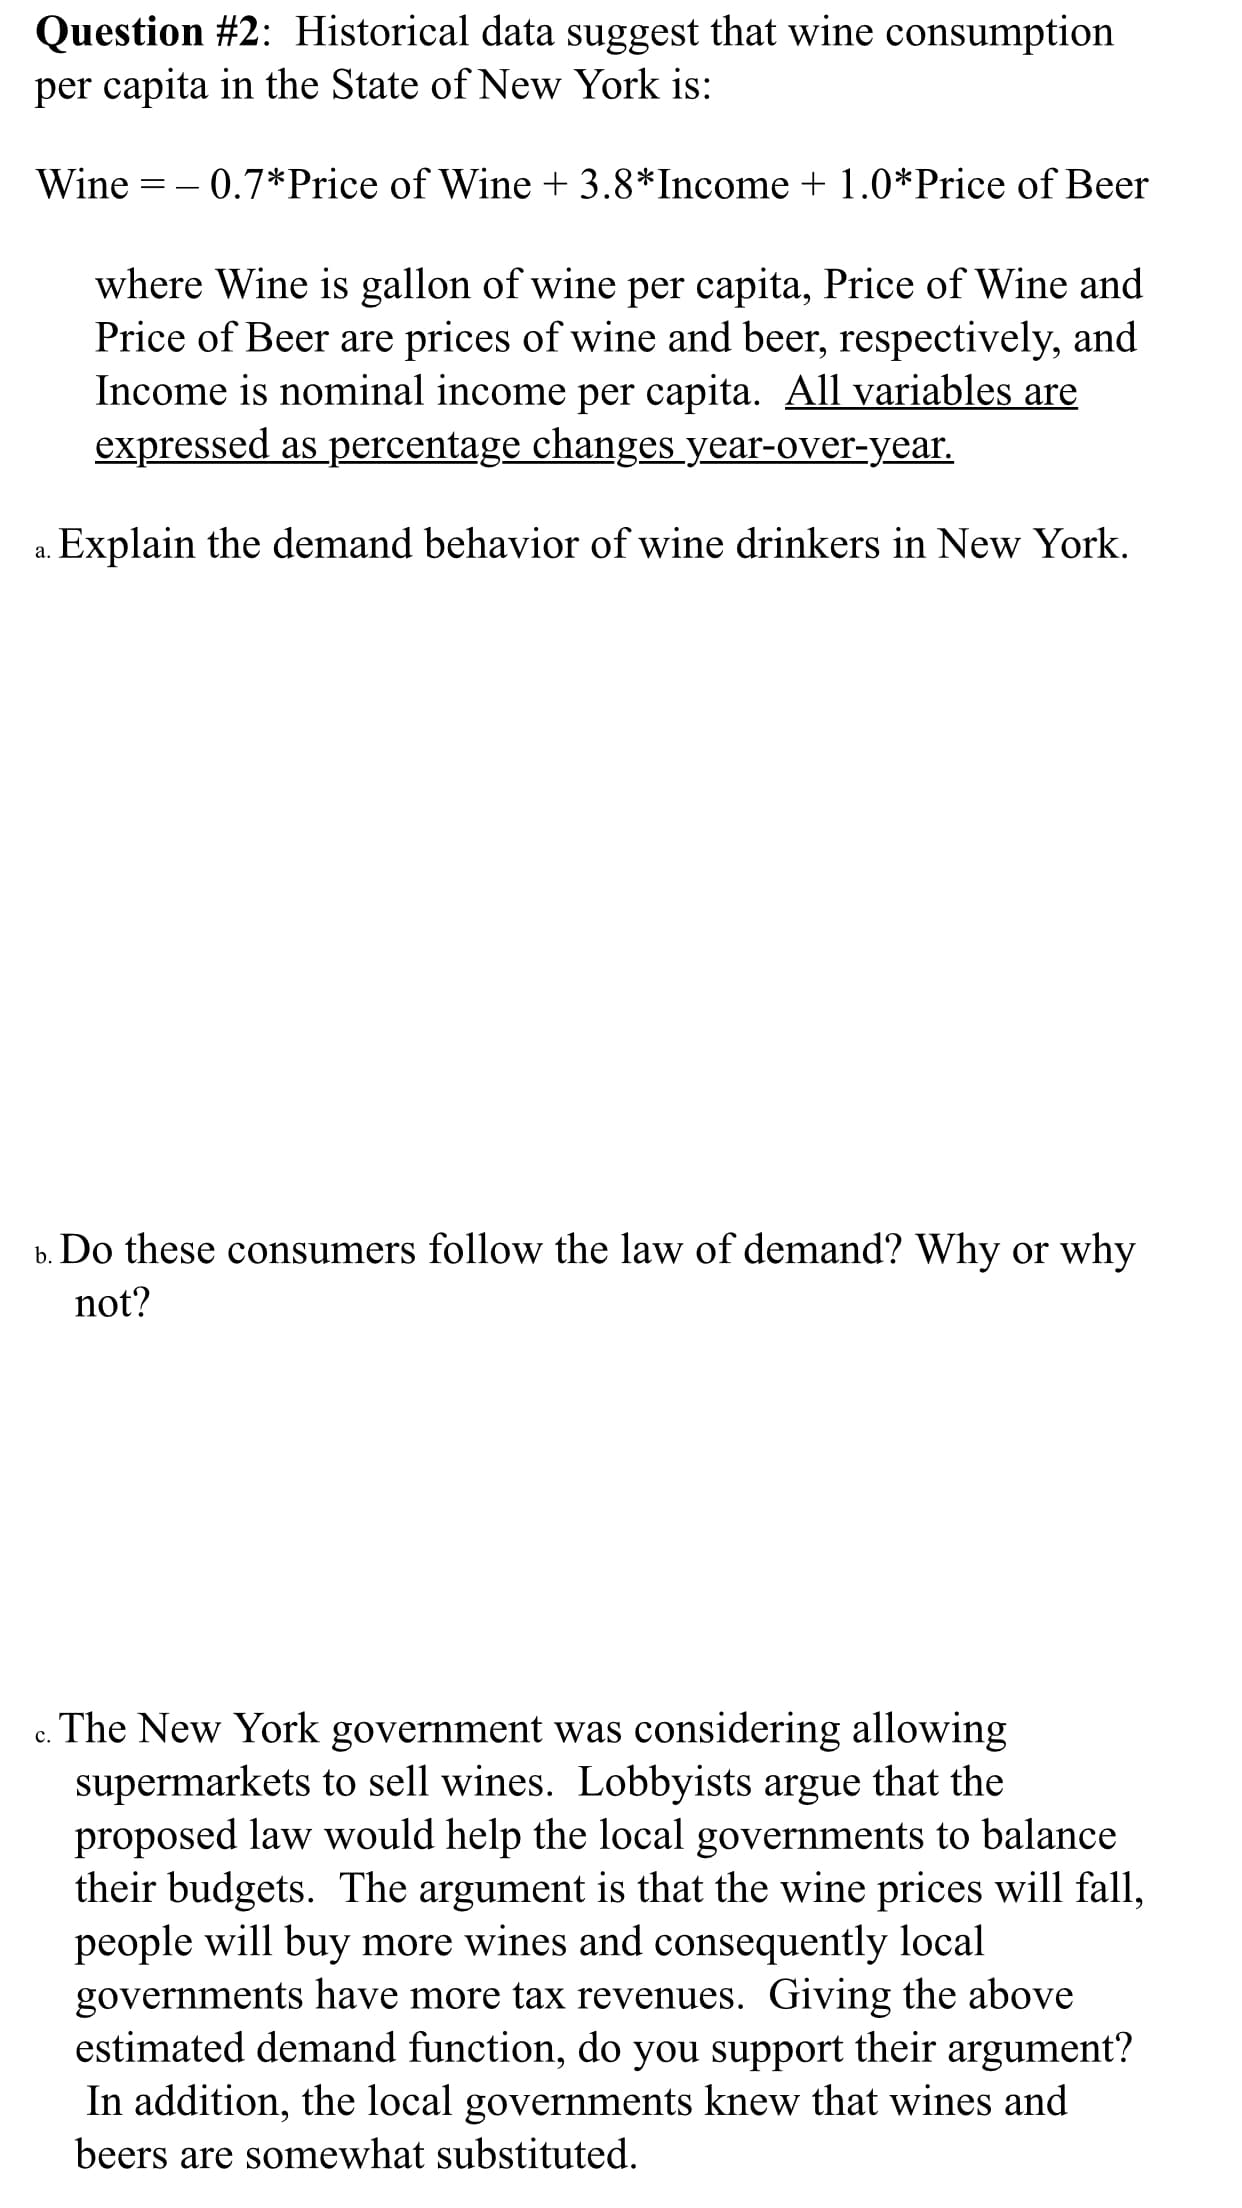 Question #2: Historical data suggest that wine consumption
per capita in the State of New York is:
0.7*Price of Wine + 3.8*Income 1.0*Price of Beer
Wine
where Wine is gallon of wine per capita, Price of Wine and
Price of Beer are prices of wine and beer, respectively, and
Income is nominal income per capita. All variables are
expressed as percentage changes year-over-year.
.Explain the demand behavior of wine drinkers in New York.
Do these consumers follow the law of demand? Why or why
b.
not?
The New York government was considering allowing
supermarkets to sell wines. Lobbyists argue that the
proposed law would help the local governments to balance
their budgets. The argument is that the wine prices will fall,
people will buy
governments have more tax revenues. Giving the above
estimated demand function, do you support their argument?
In addition, the local governments knew that wines and
beers are somewhat substituted
C.
more wines and consequently local
